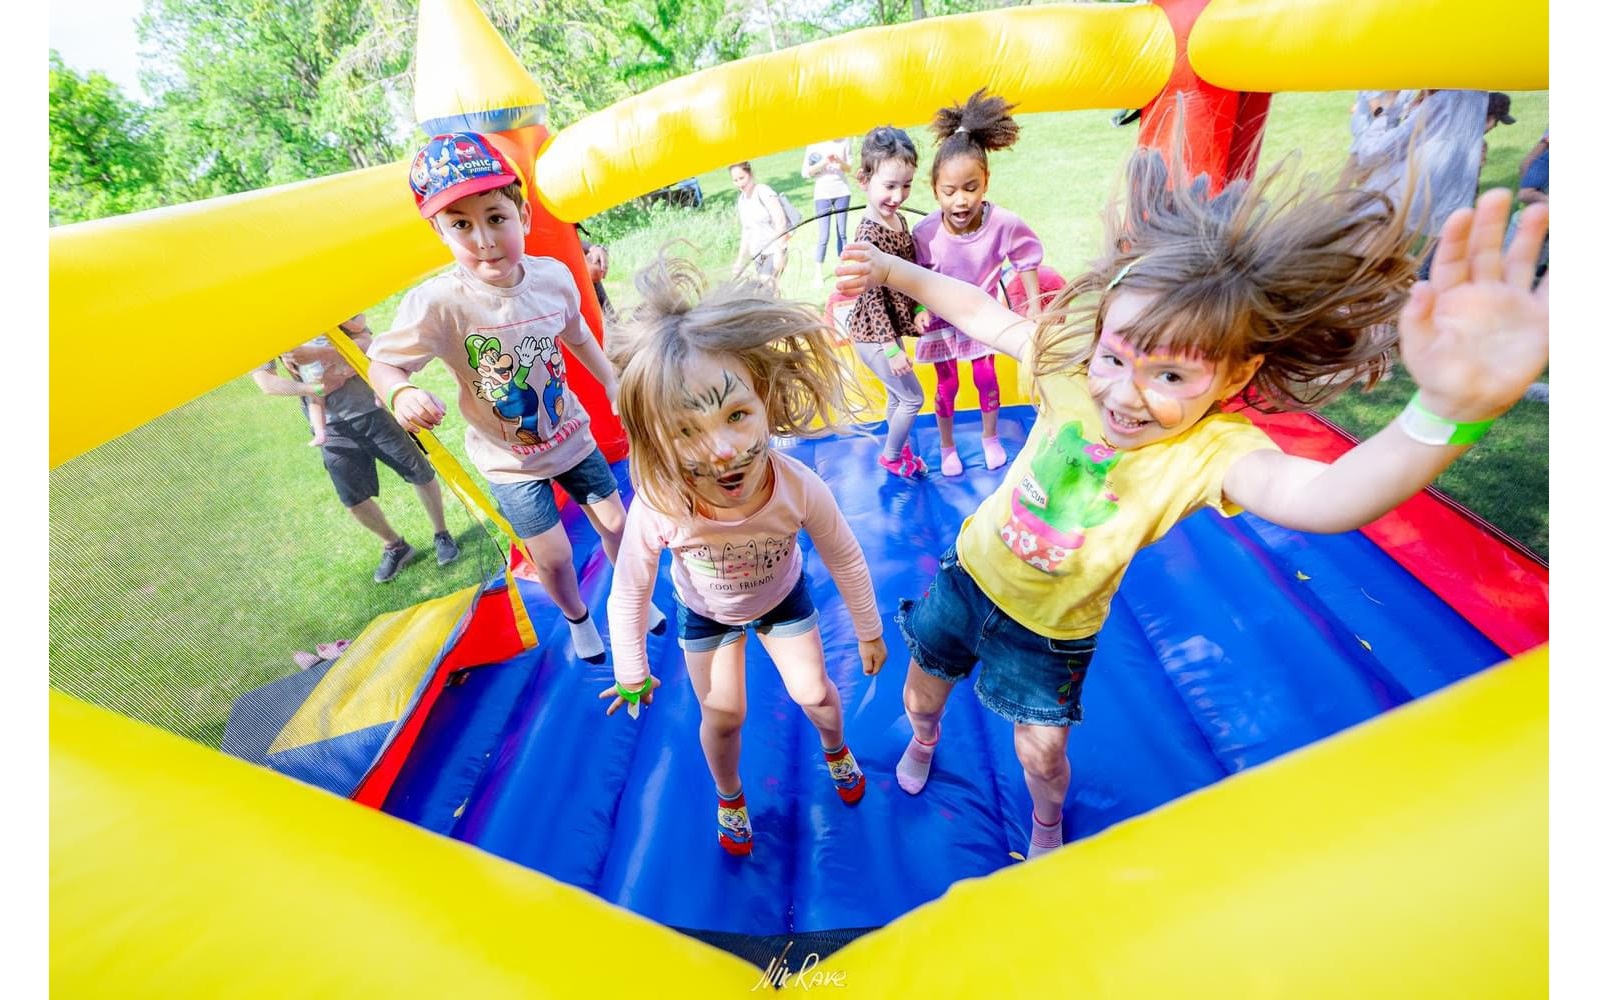 Inflatable Bouncy castles, Obstacle Courses, Waterslides, Facepainting, Popcorn / Cotton candy / Snow cone machines, party yard indoor and outdoor games rentals in Winnipeg Manitoba